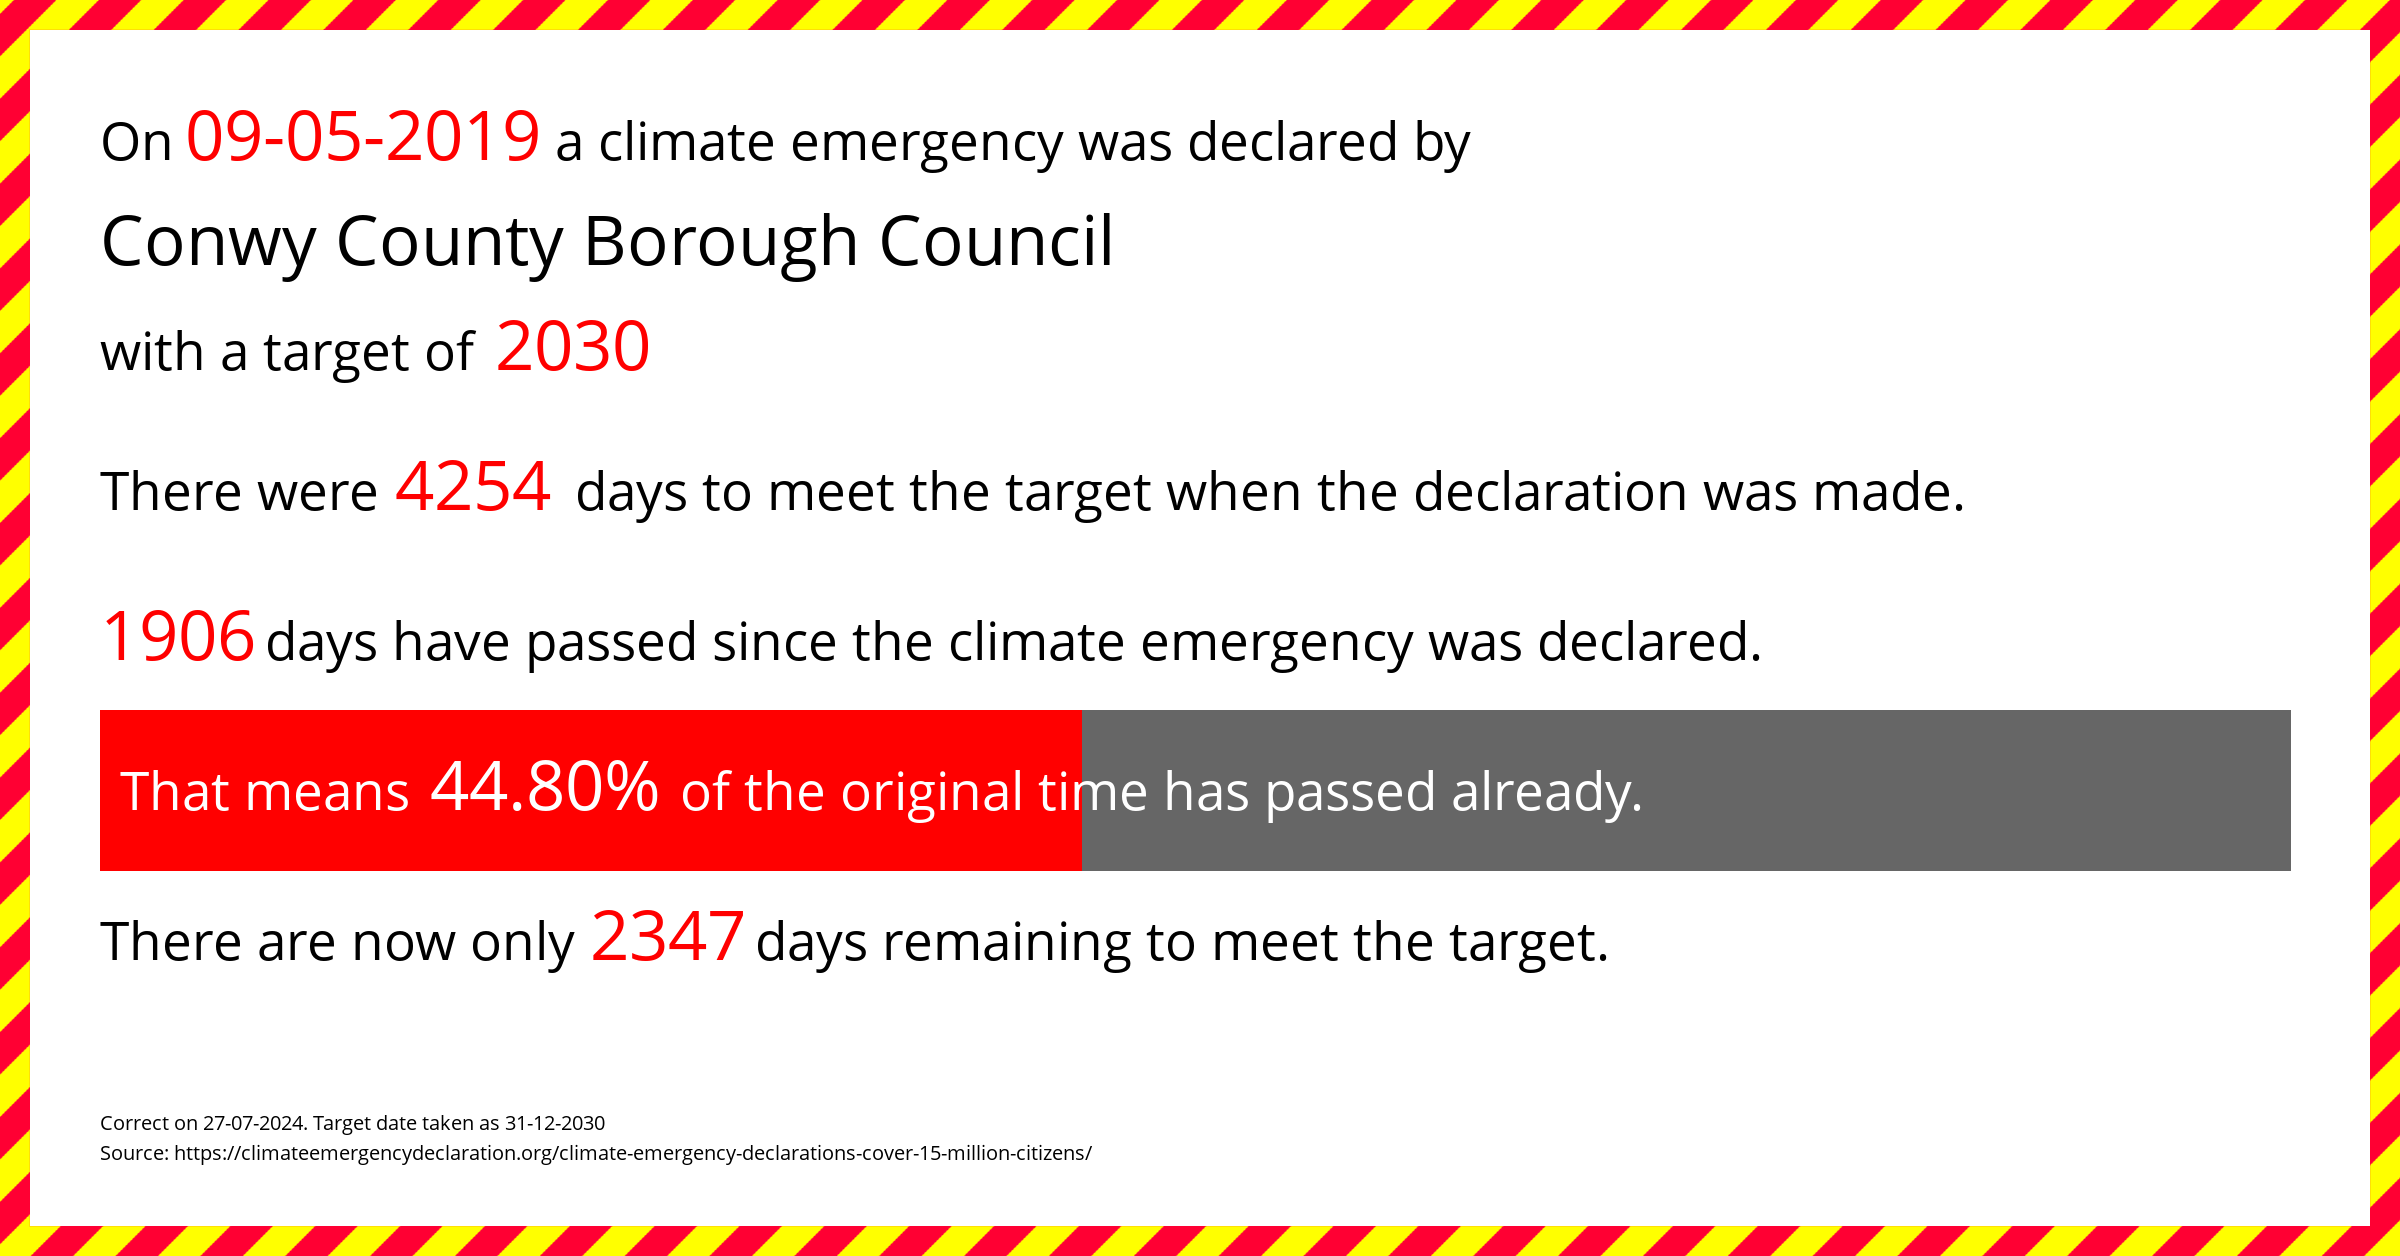 Conwy County Borough Council declared a Climate emergency on Thursday 9th May 2019, with a target of 2030.